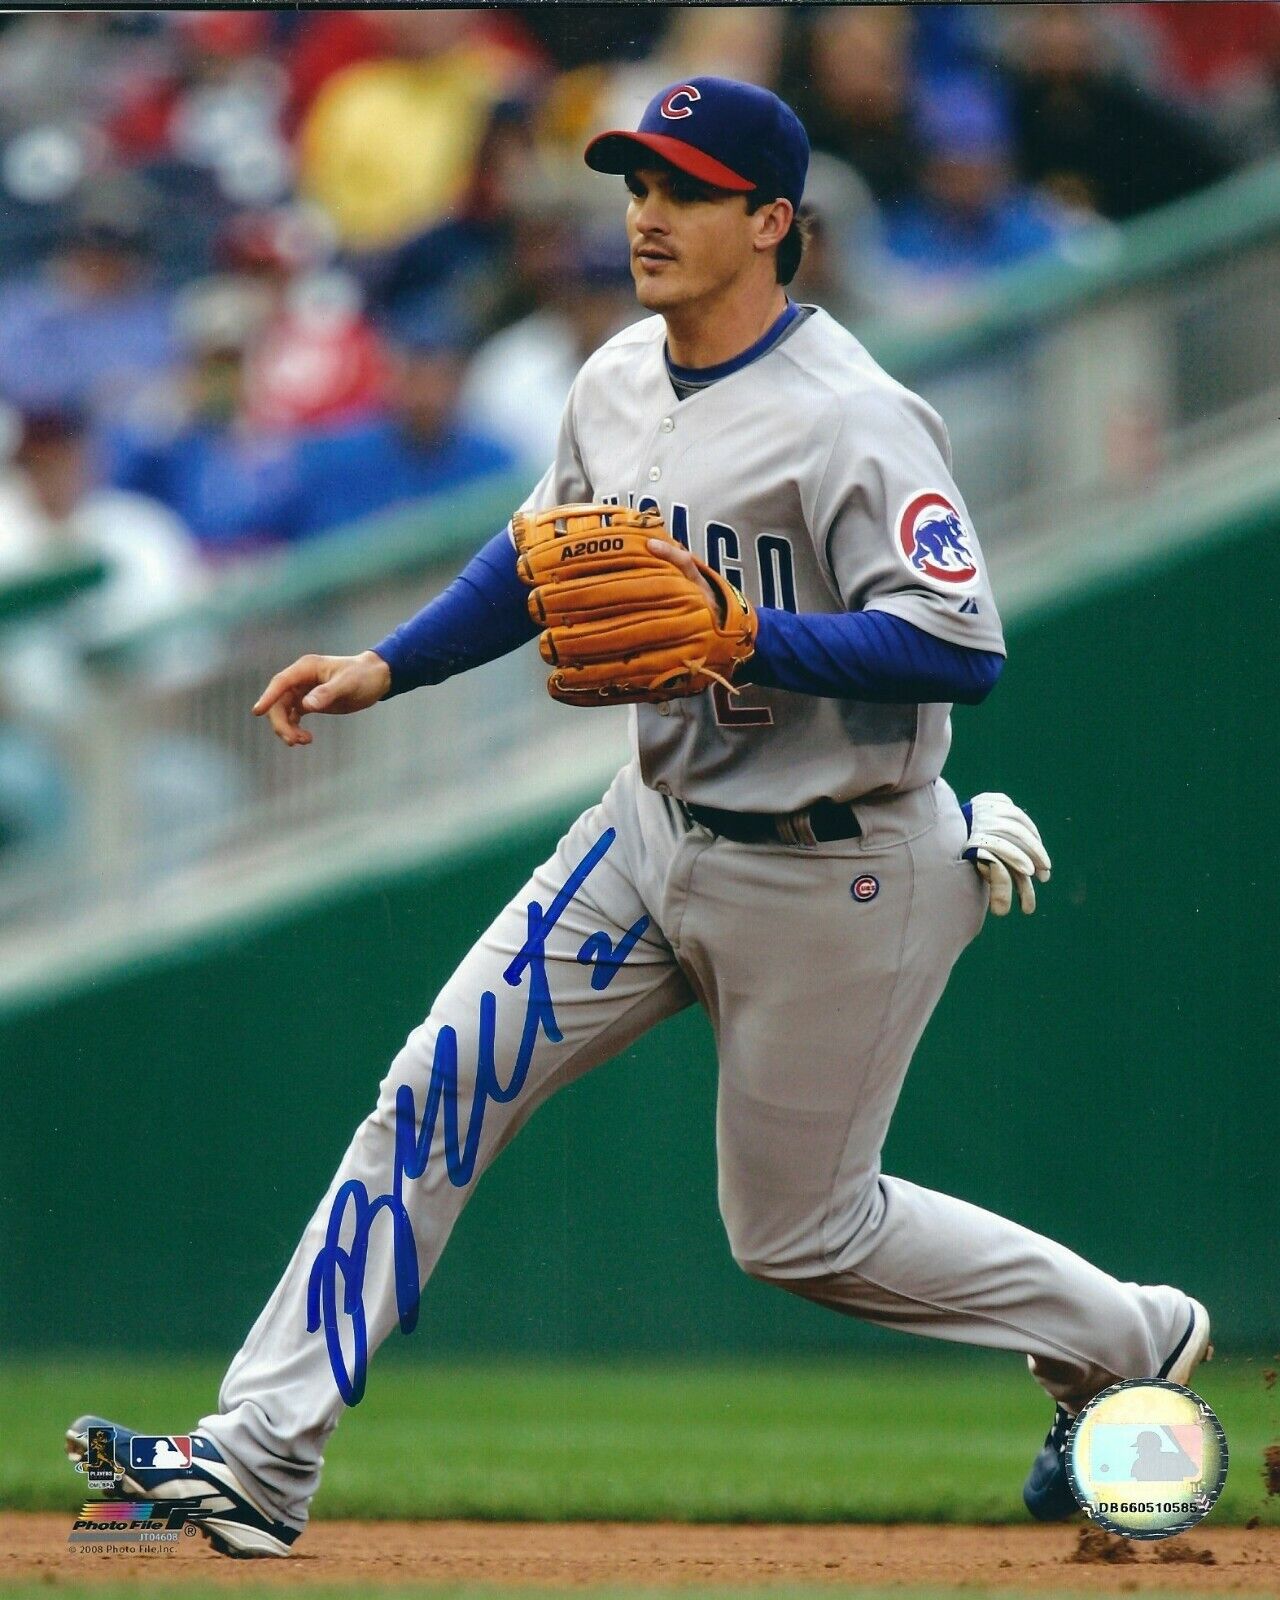 Autographed 8x10 RYAN THERIOT Chicago Cubs Autographed Photo Poster painting - COA